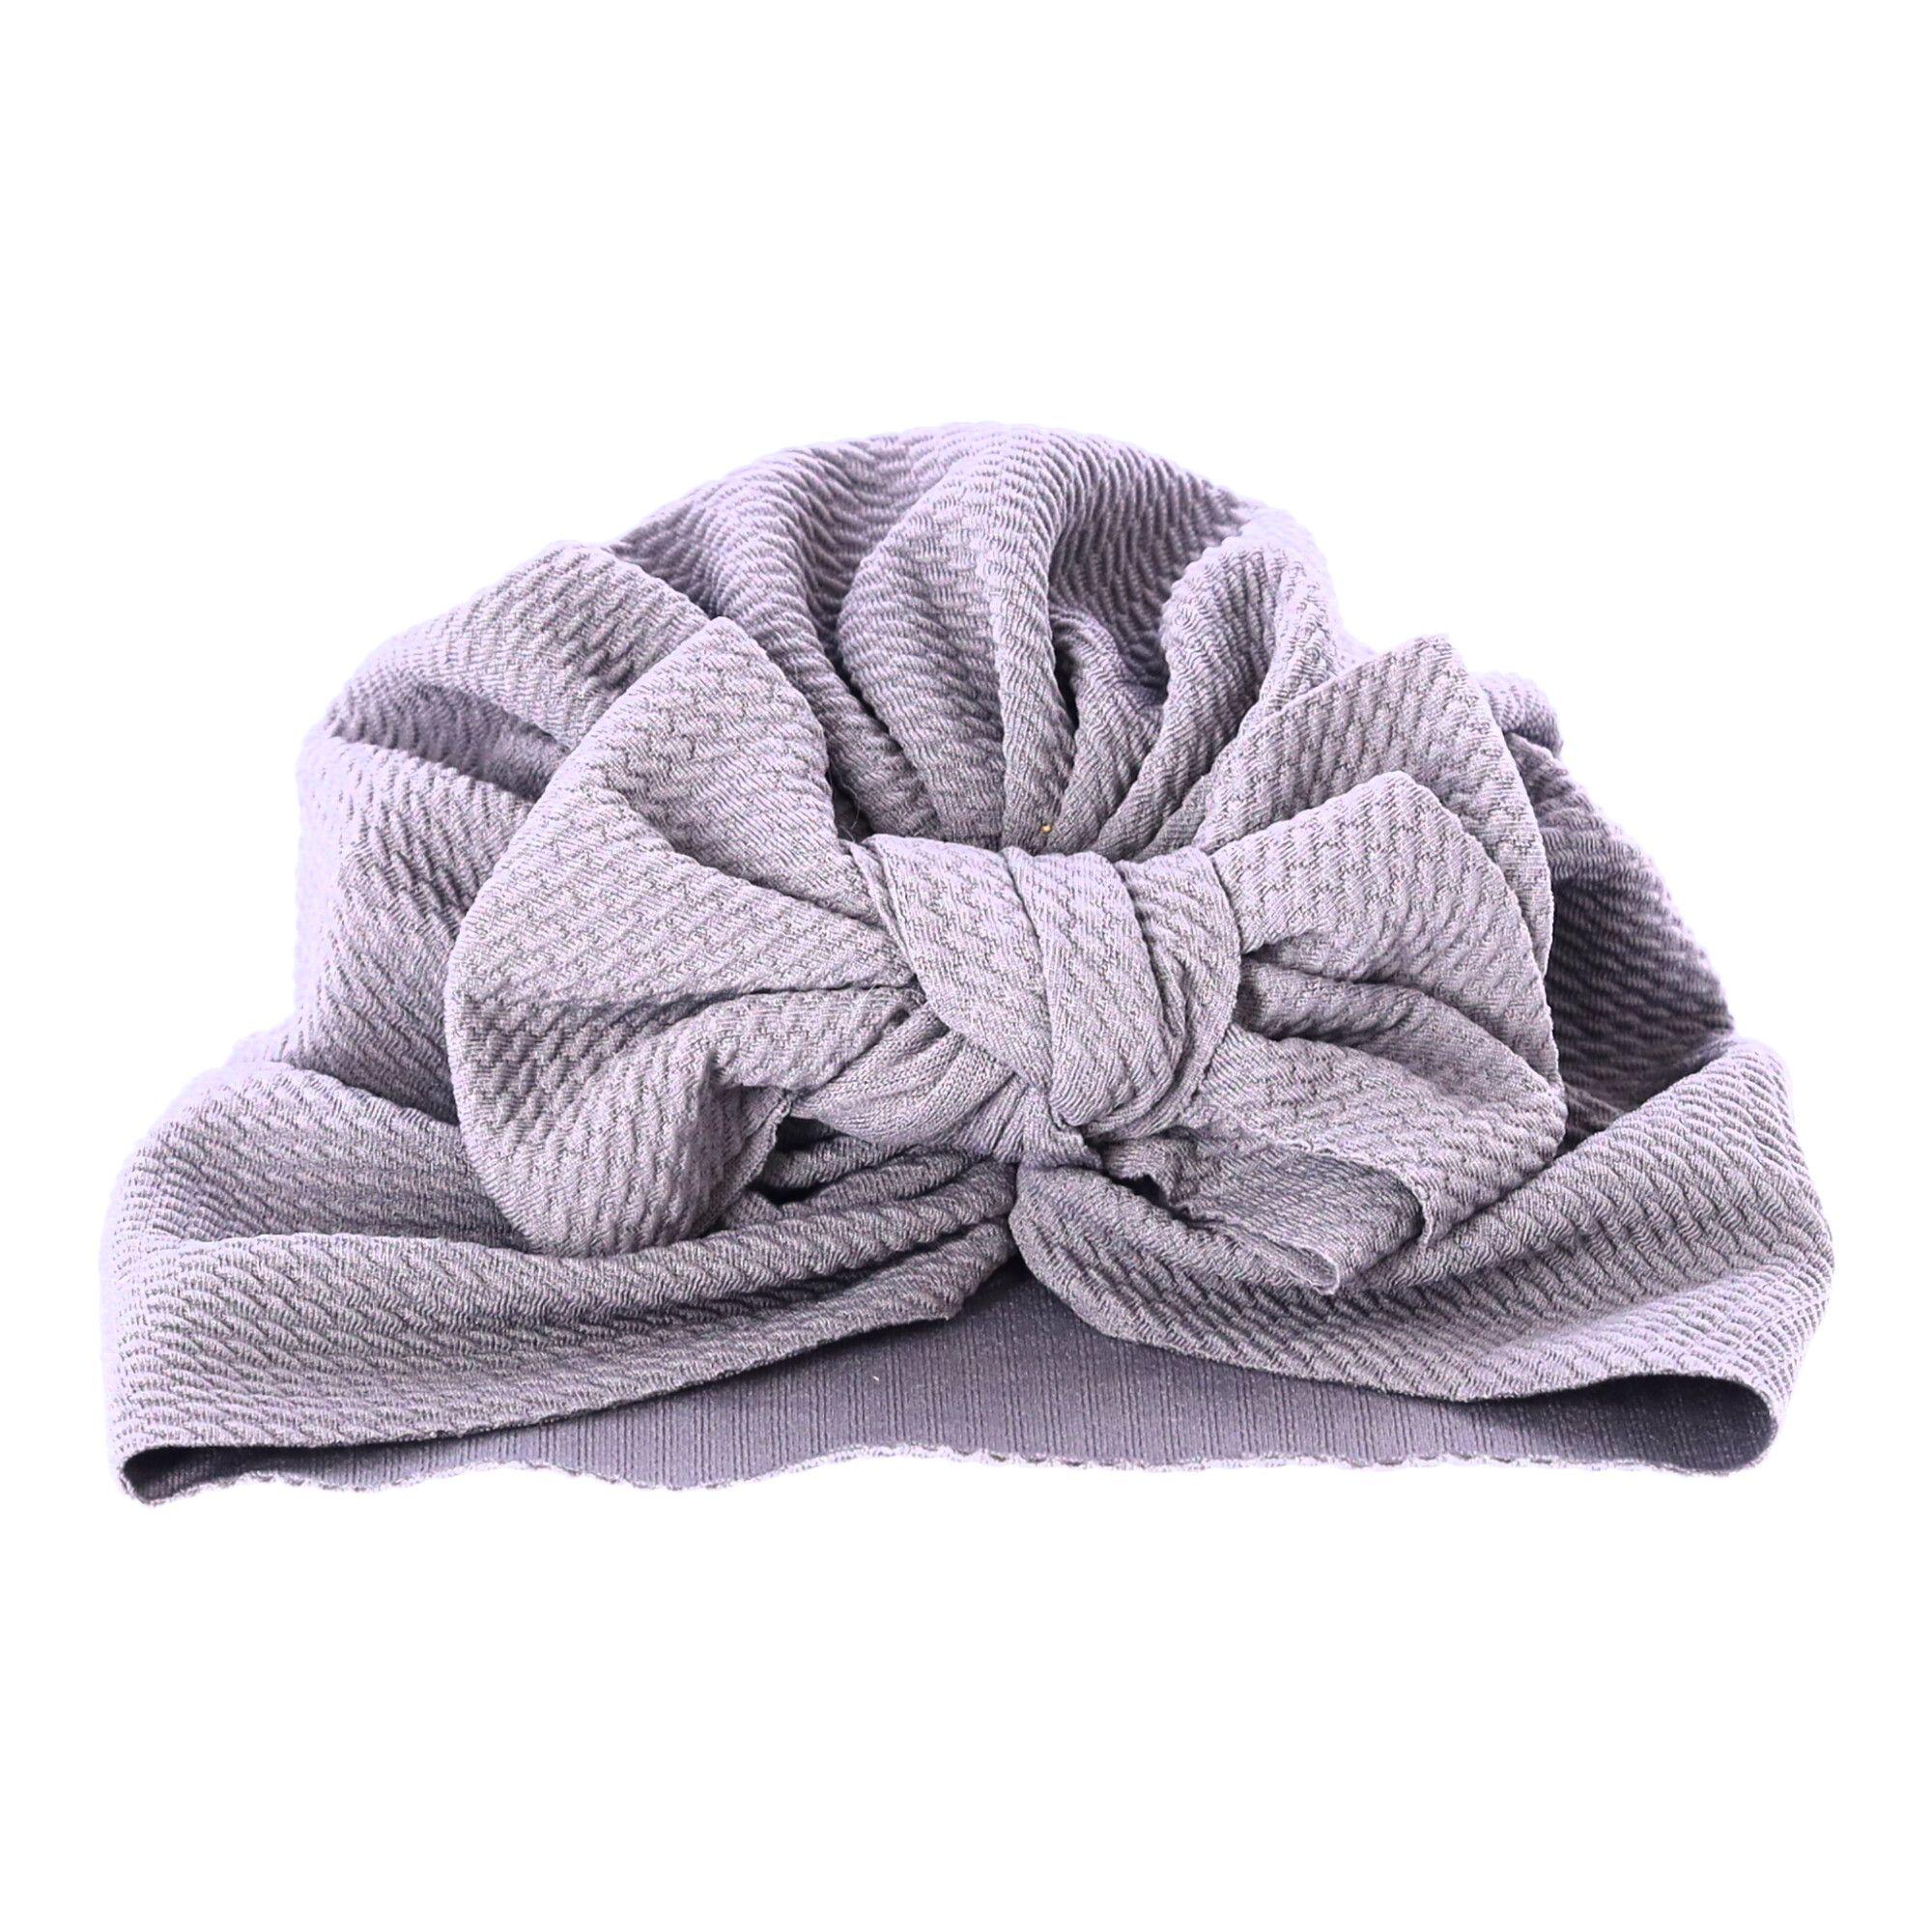 Baby turban with a bow, girl's hat - grey